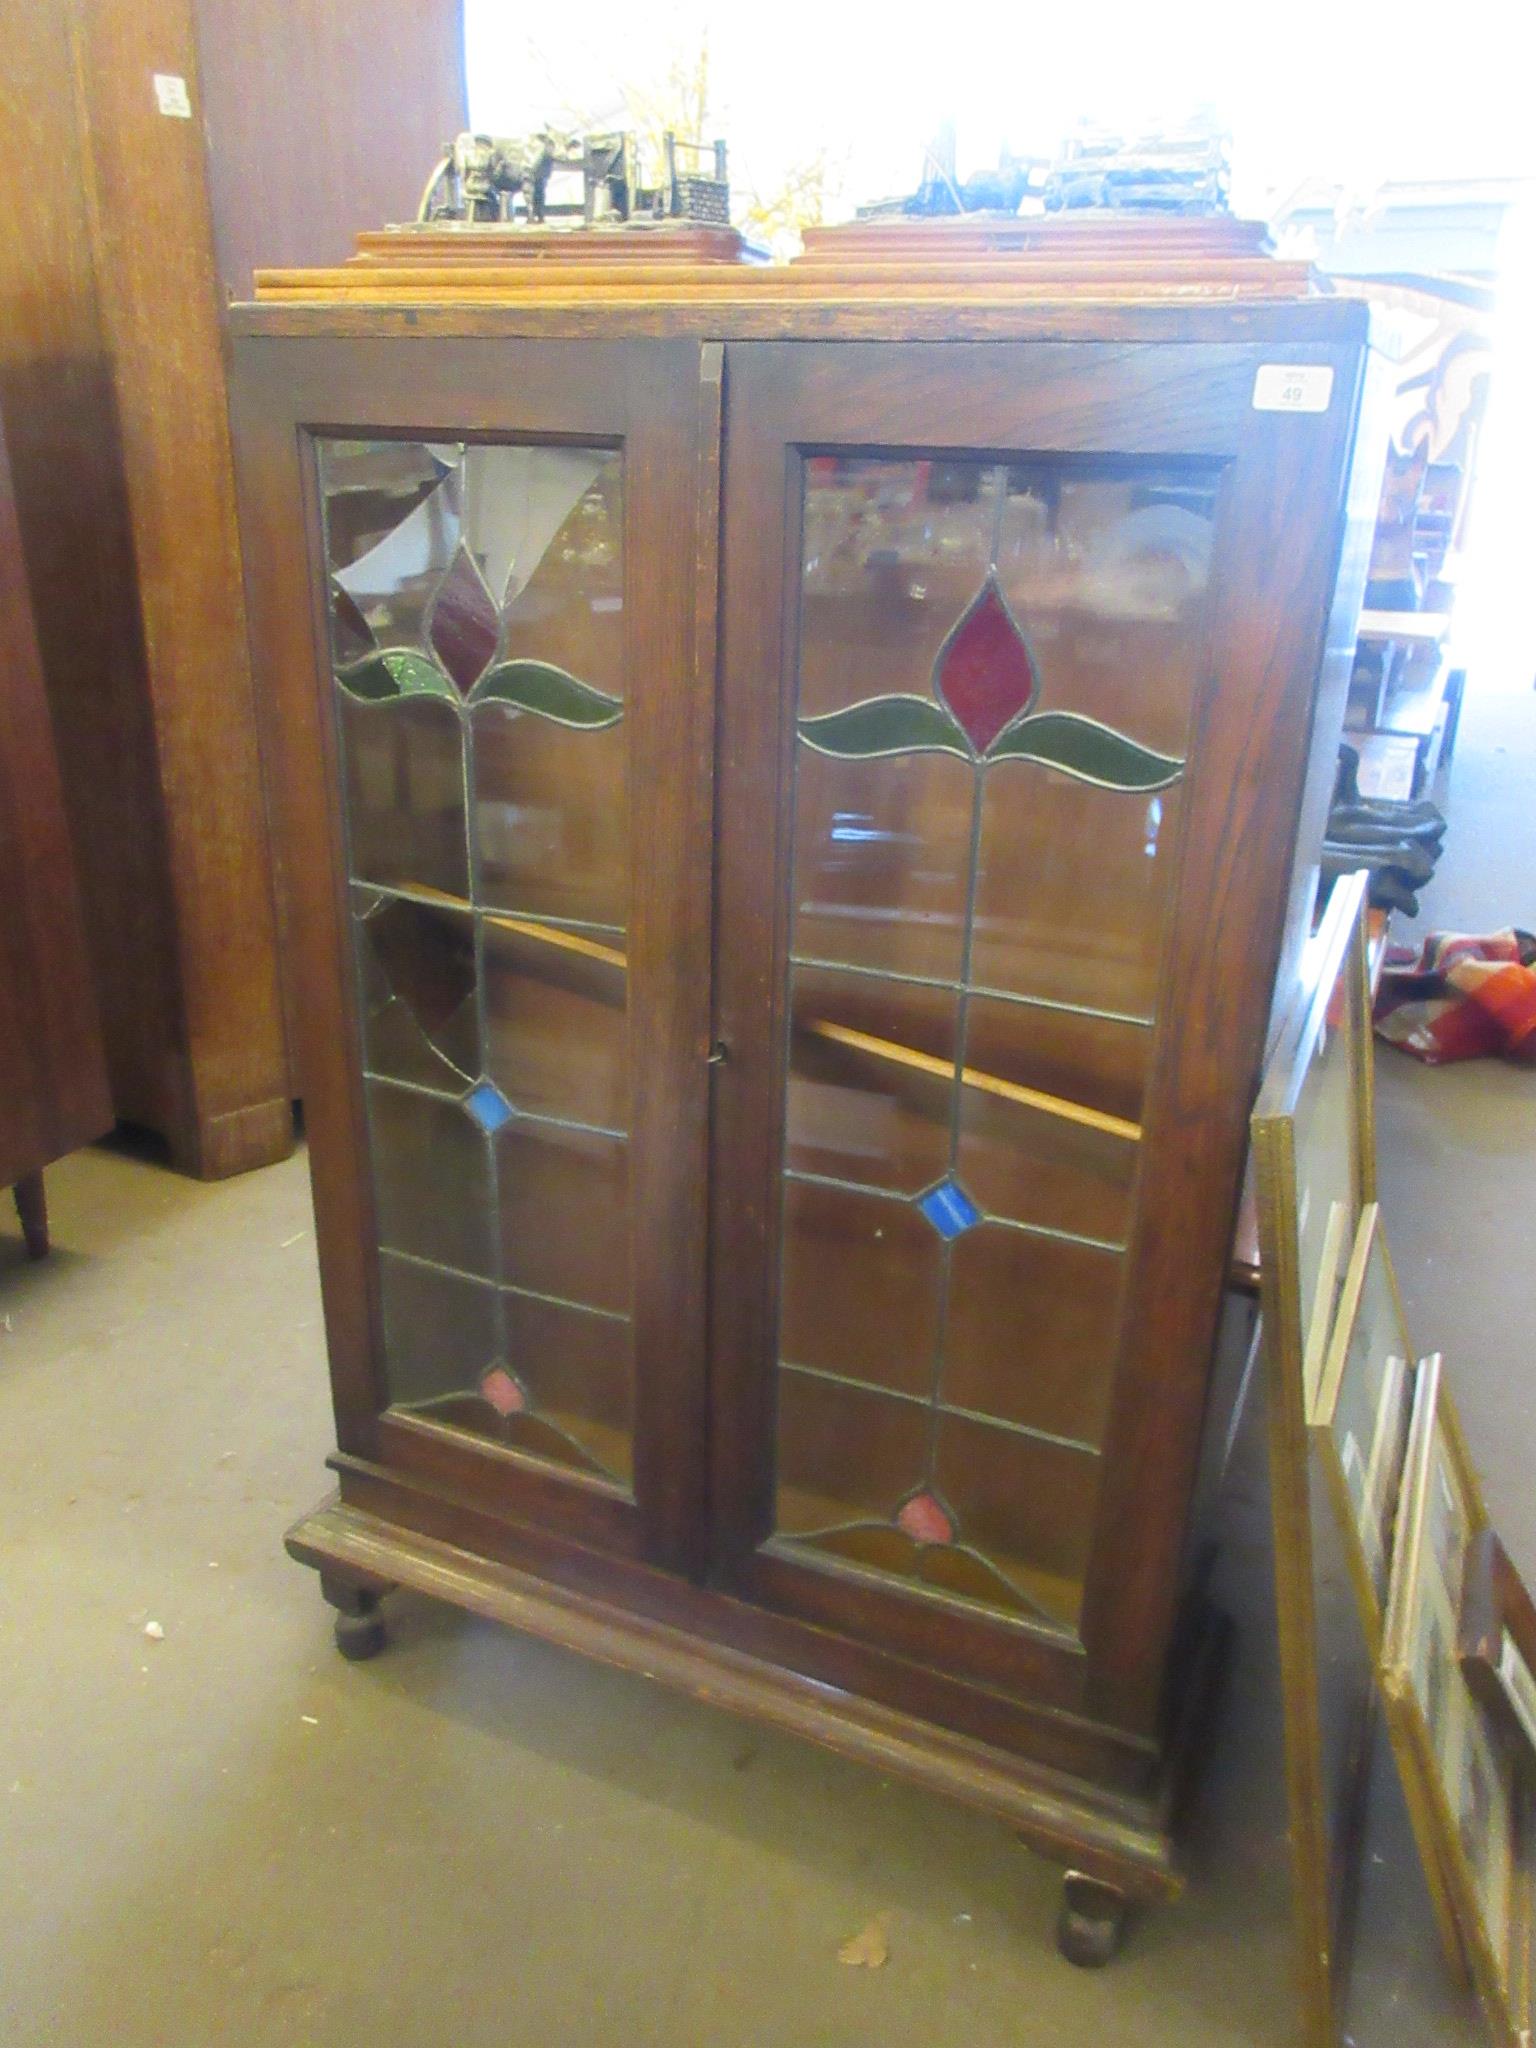 EARLY 20TH CENTURY CHINA CABINET WITH ART NOUVEAU STYLE GLAZED PANELS (A/F), WIDTH APPROX 76CM - Image 2 of 2